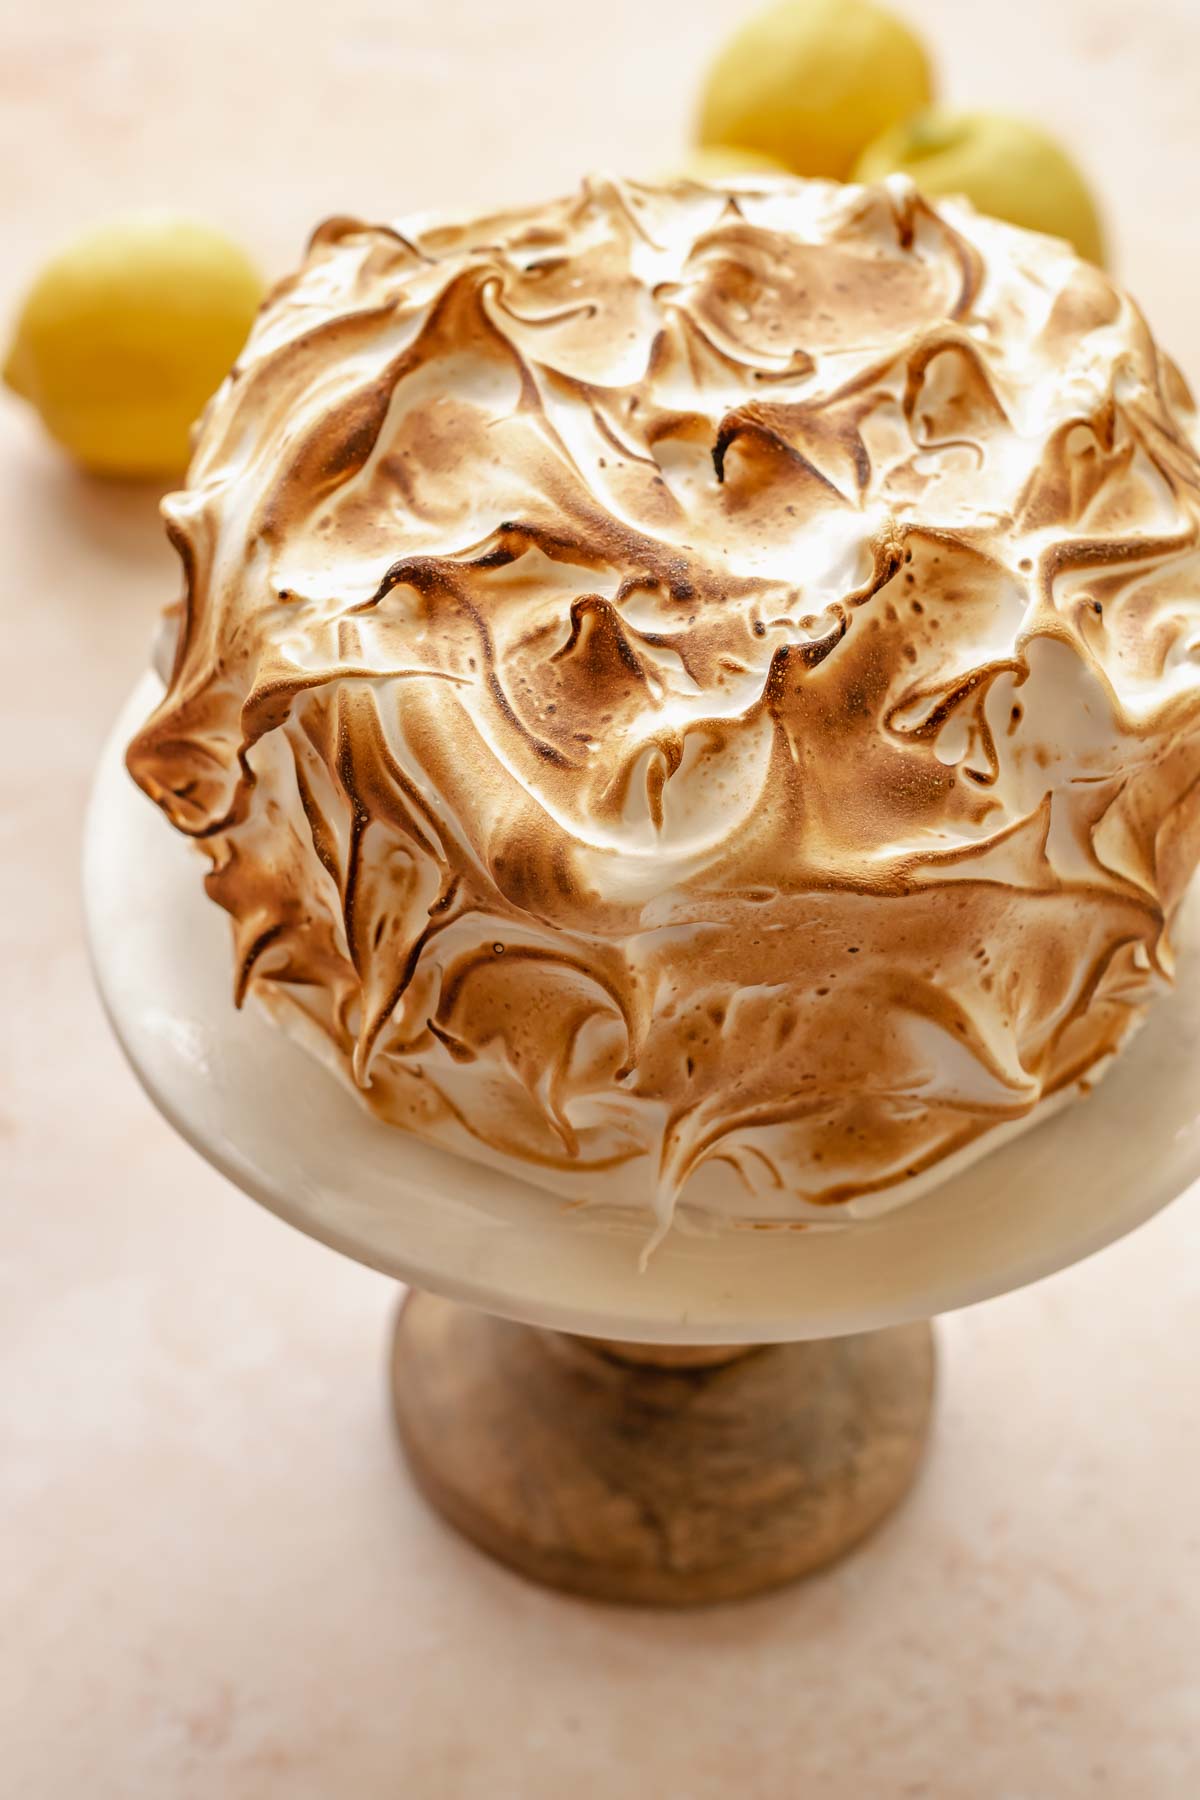 Torched lemon meringue cake on a cake stand.